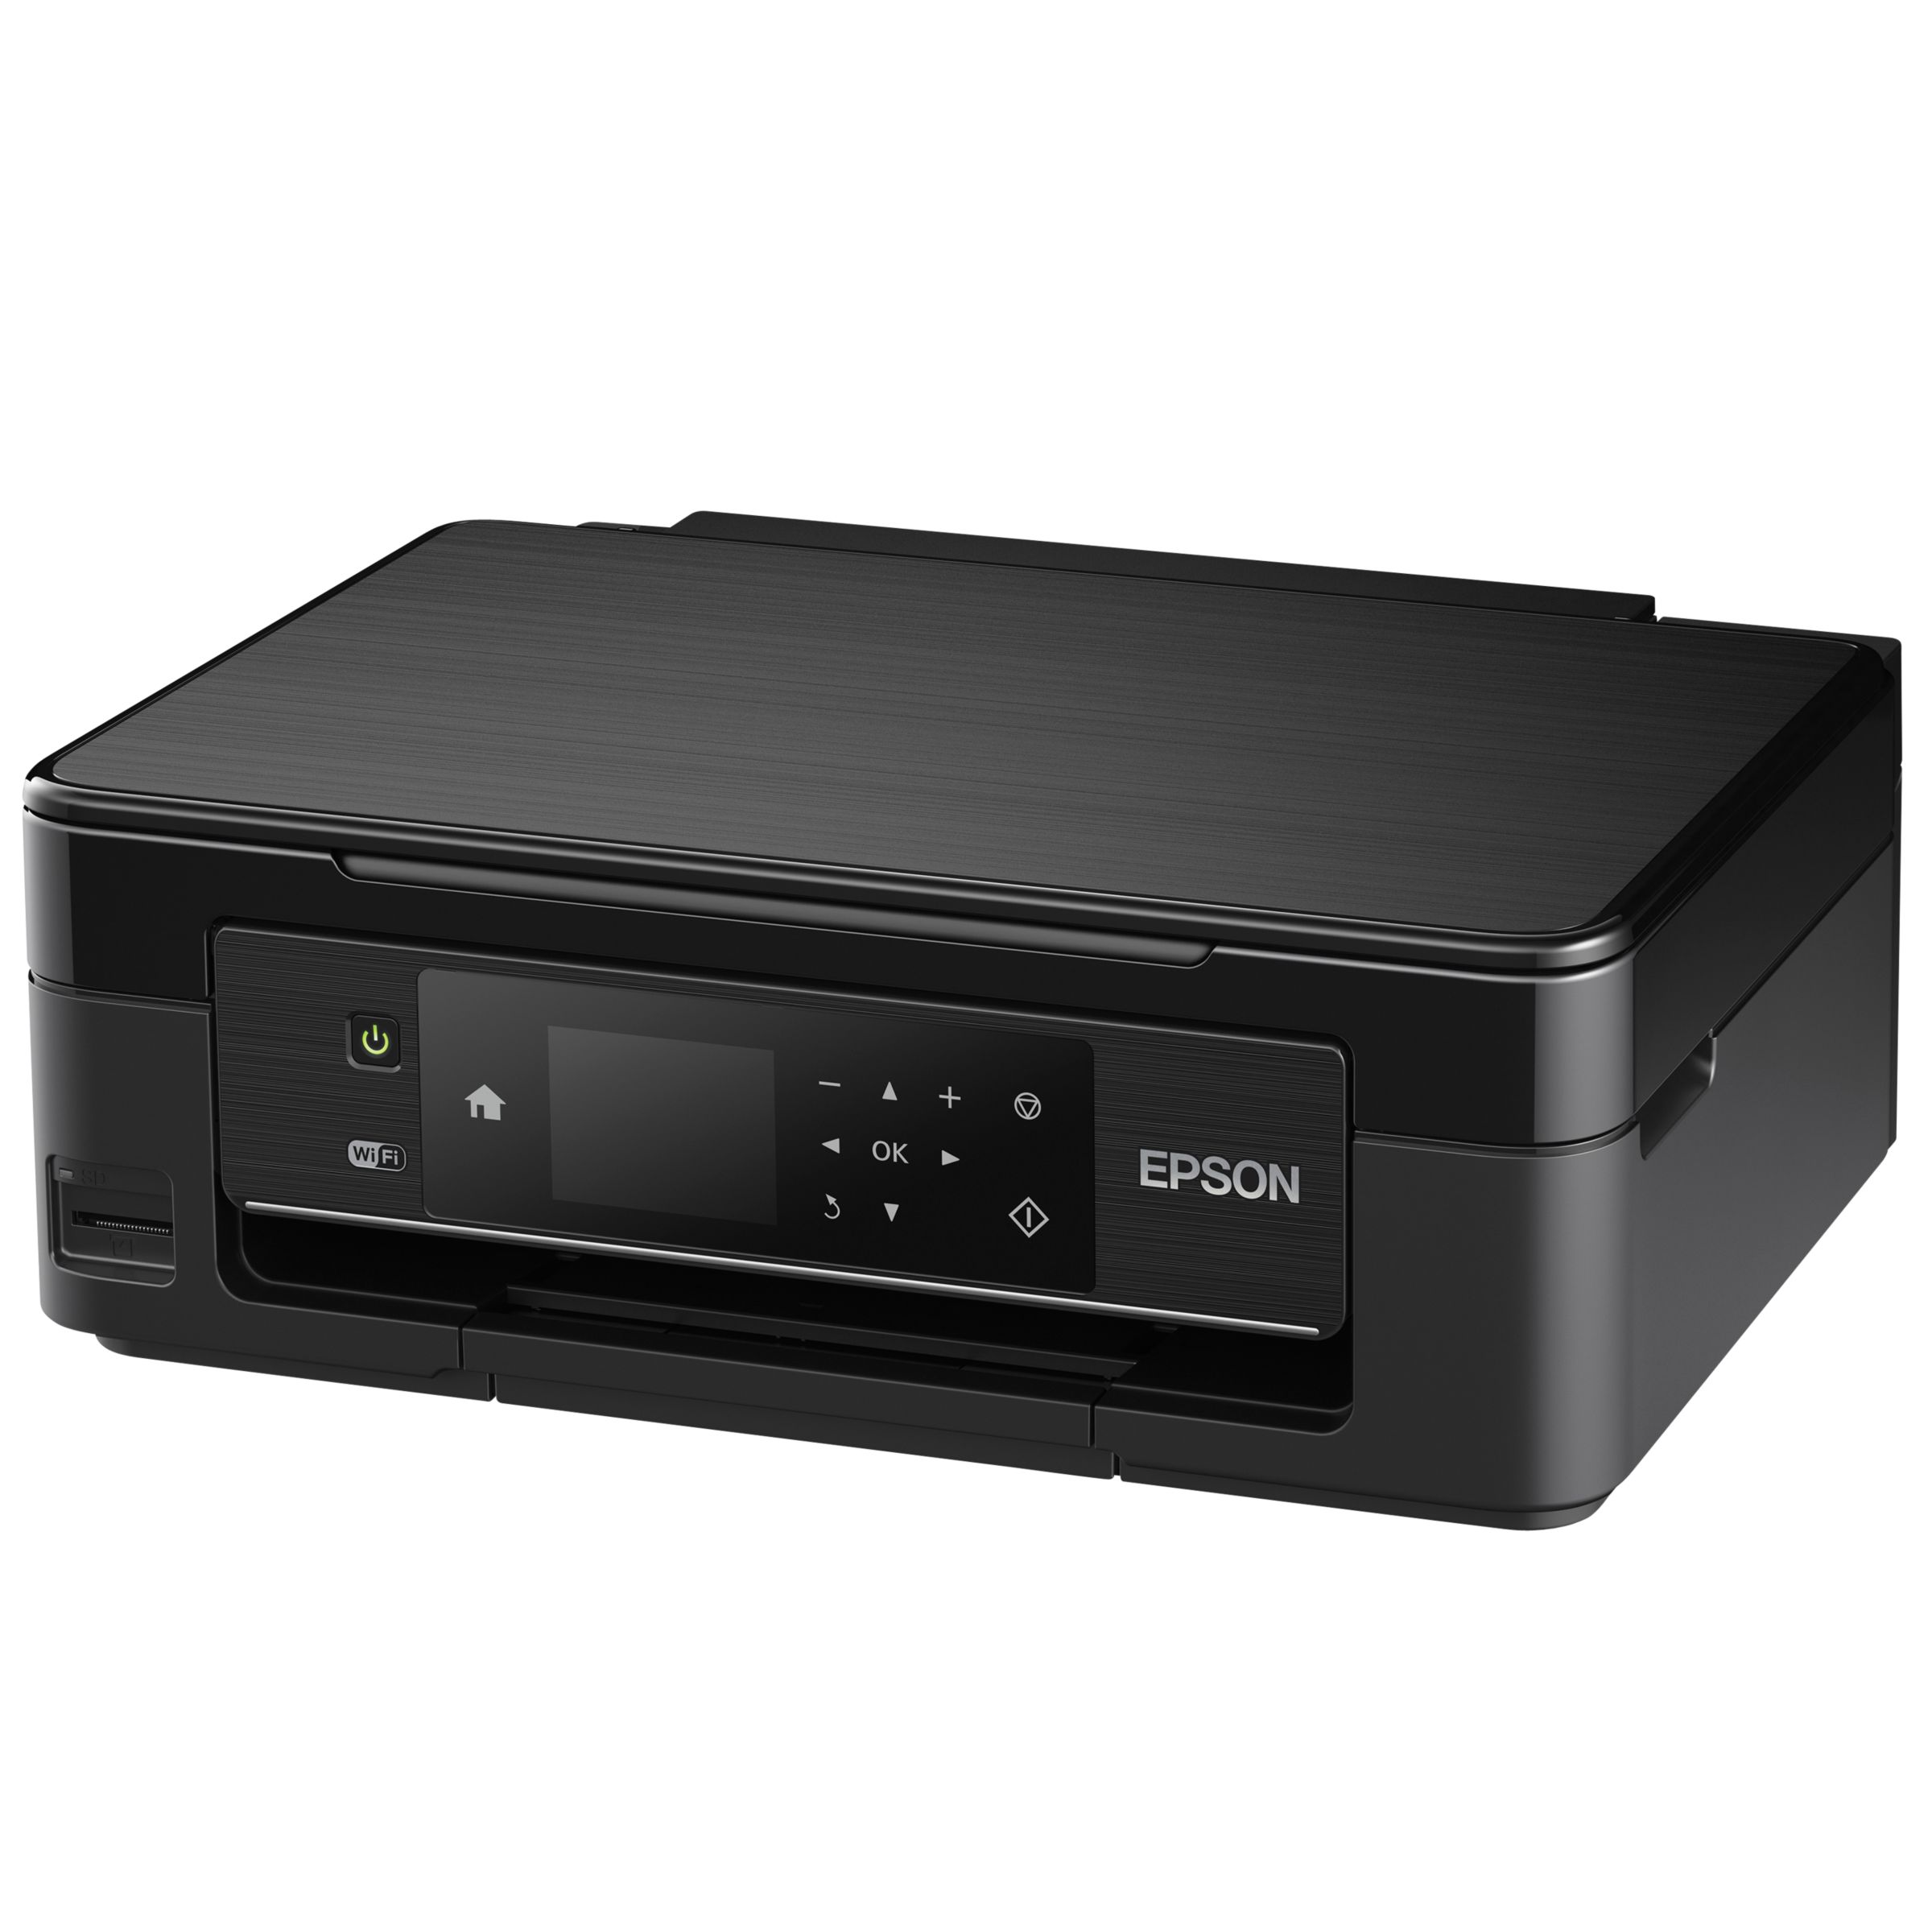 Epson Expression Home XP-442 Wi-Fi All-in-One Printer, Black